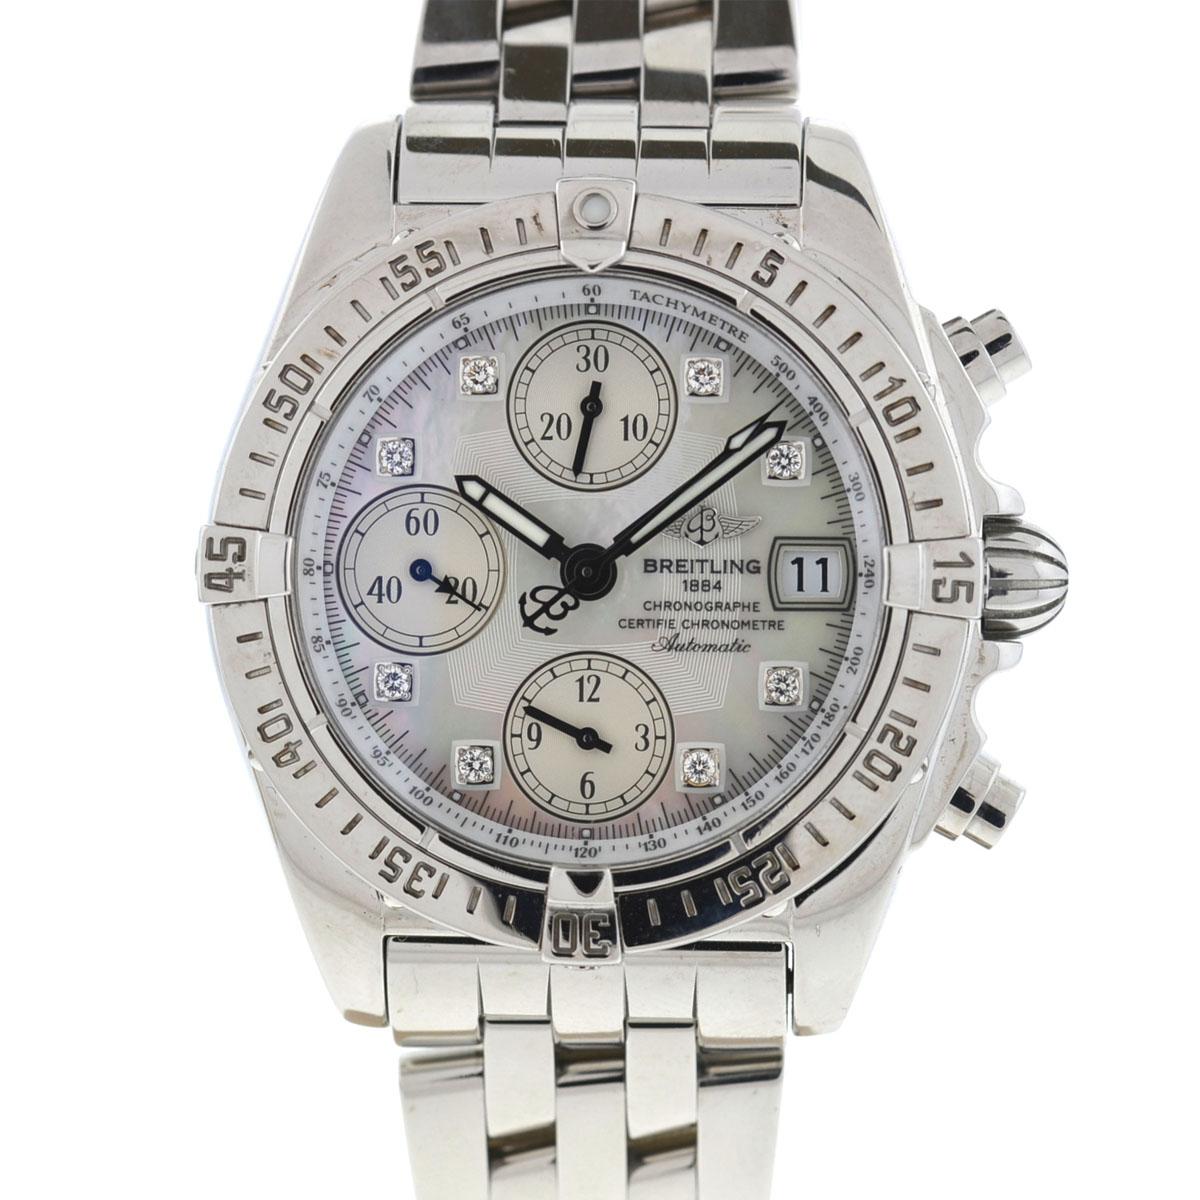 Breitling A13358 Cockpit Chronograph MOP Diamond Dial Stainless Steel Watch